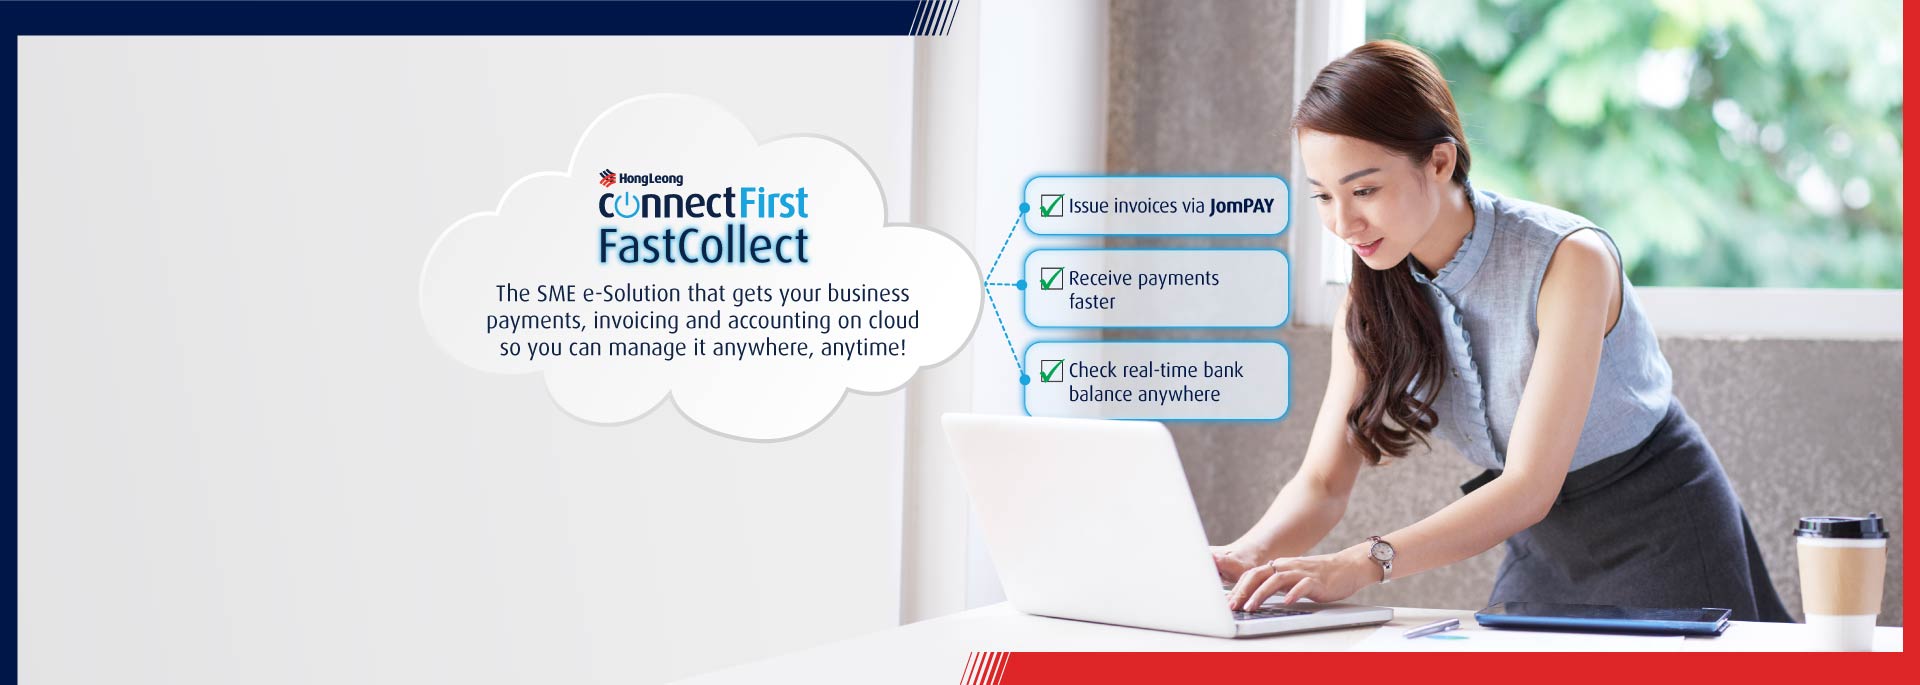 ConnectFirst FastCollect Campaign